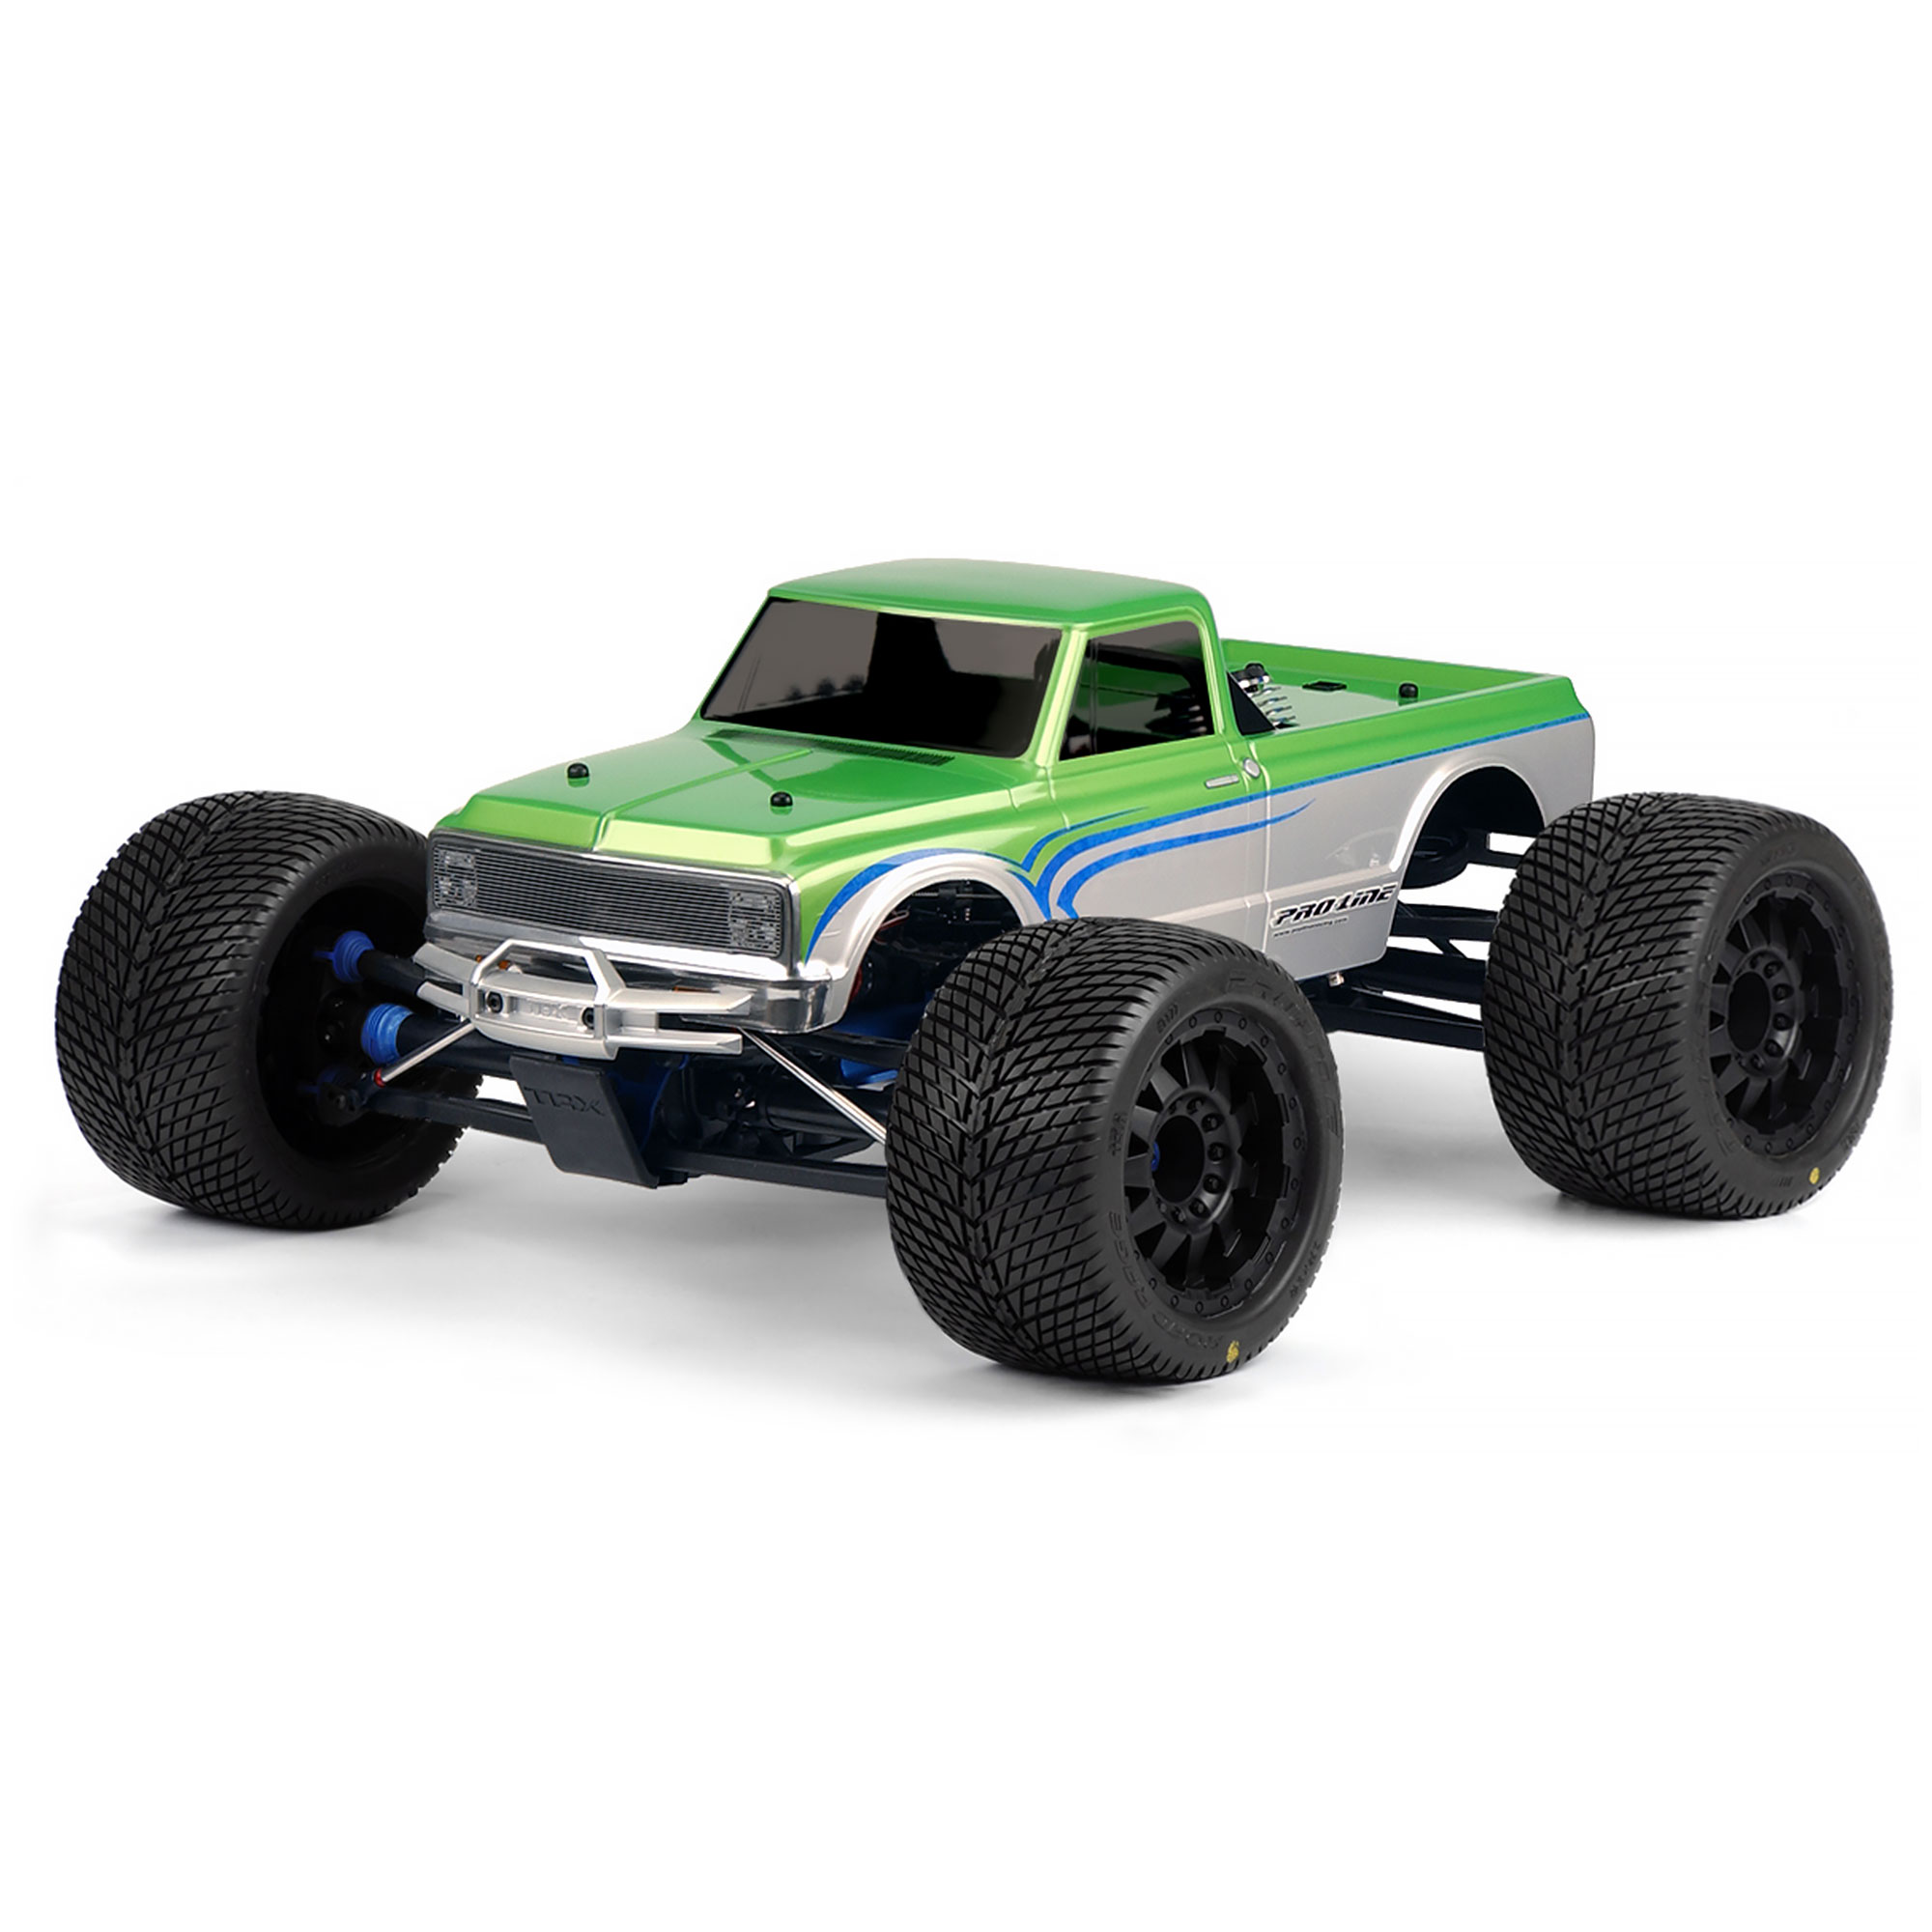 1/8 1972 Chevy C-10 Long Bed Clear Body: Monster Truck